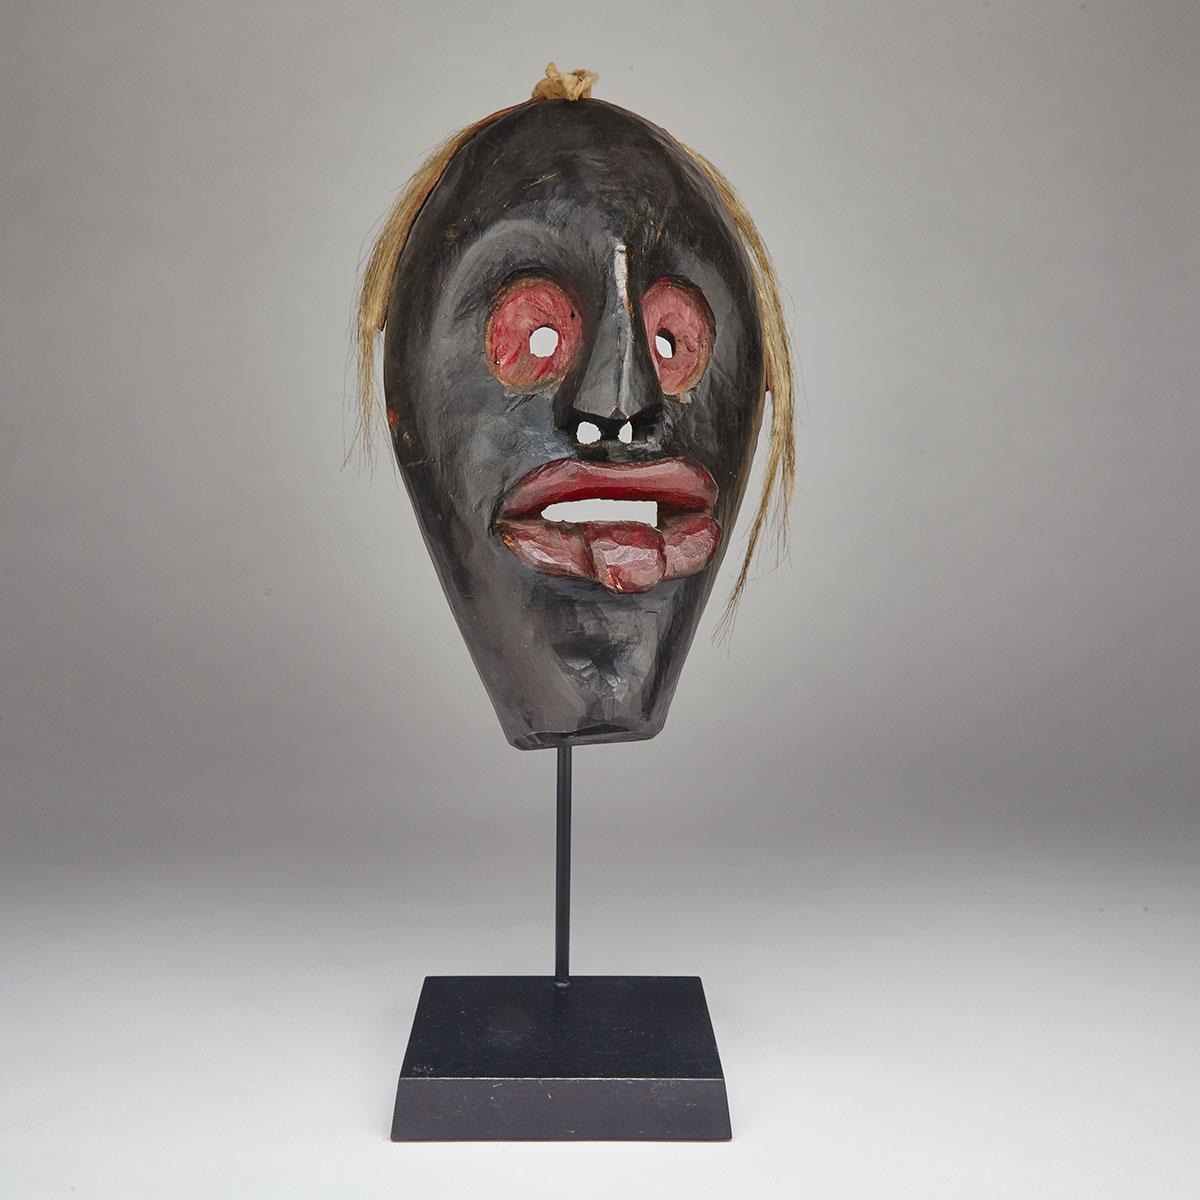 North American Iroquois Indian False Face Society Mask, 19th/20th century